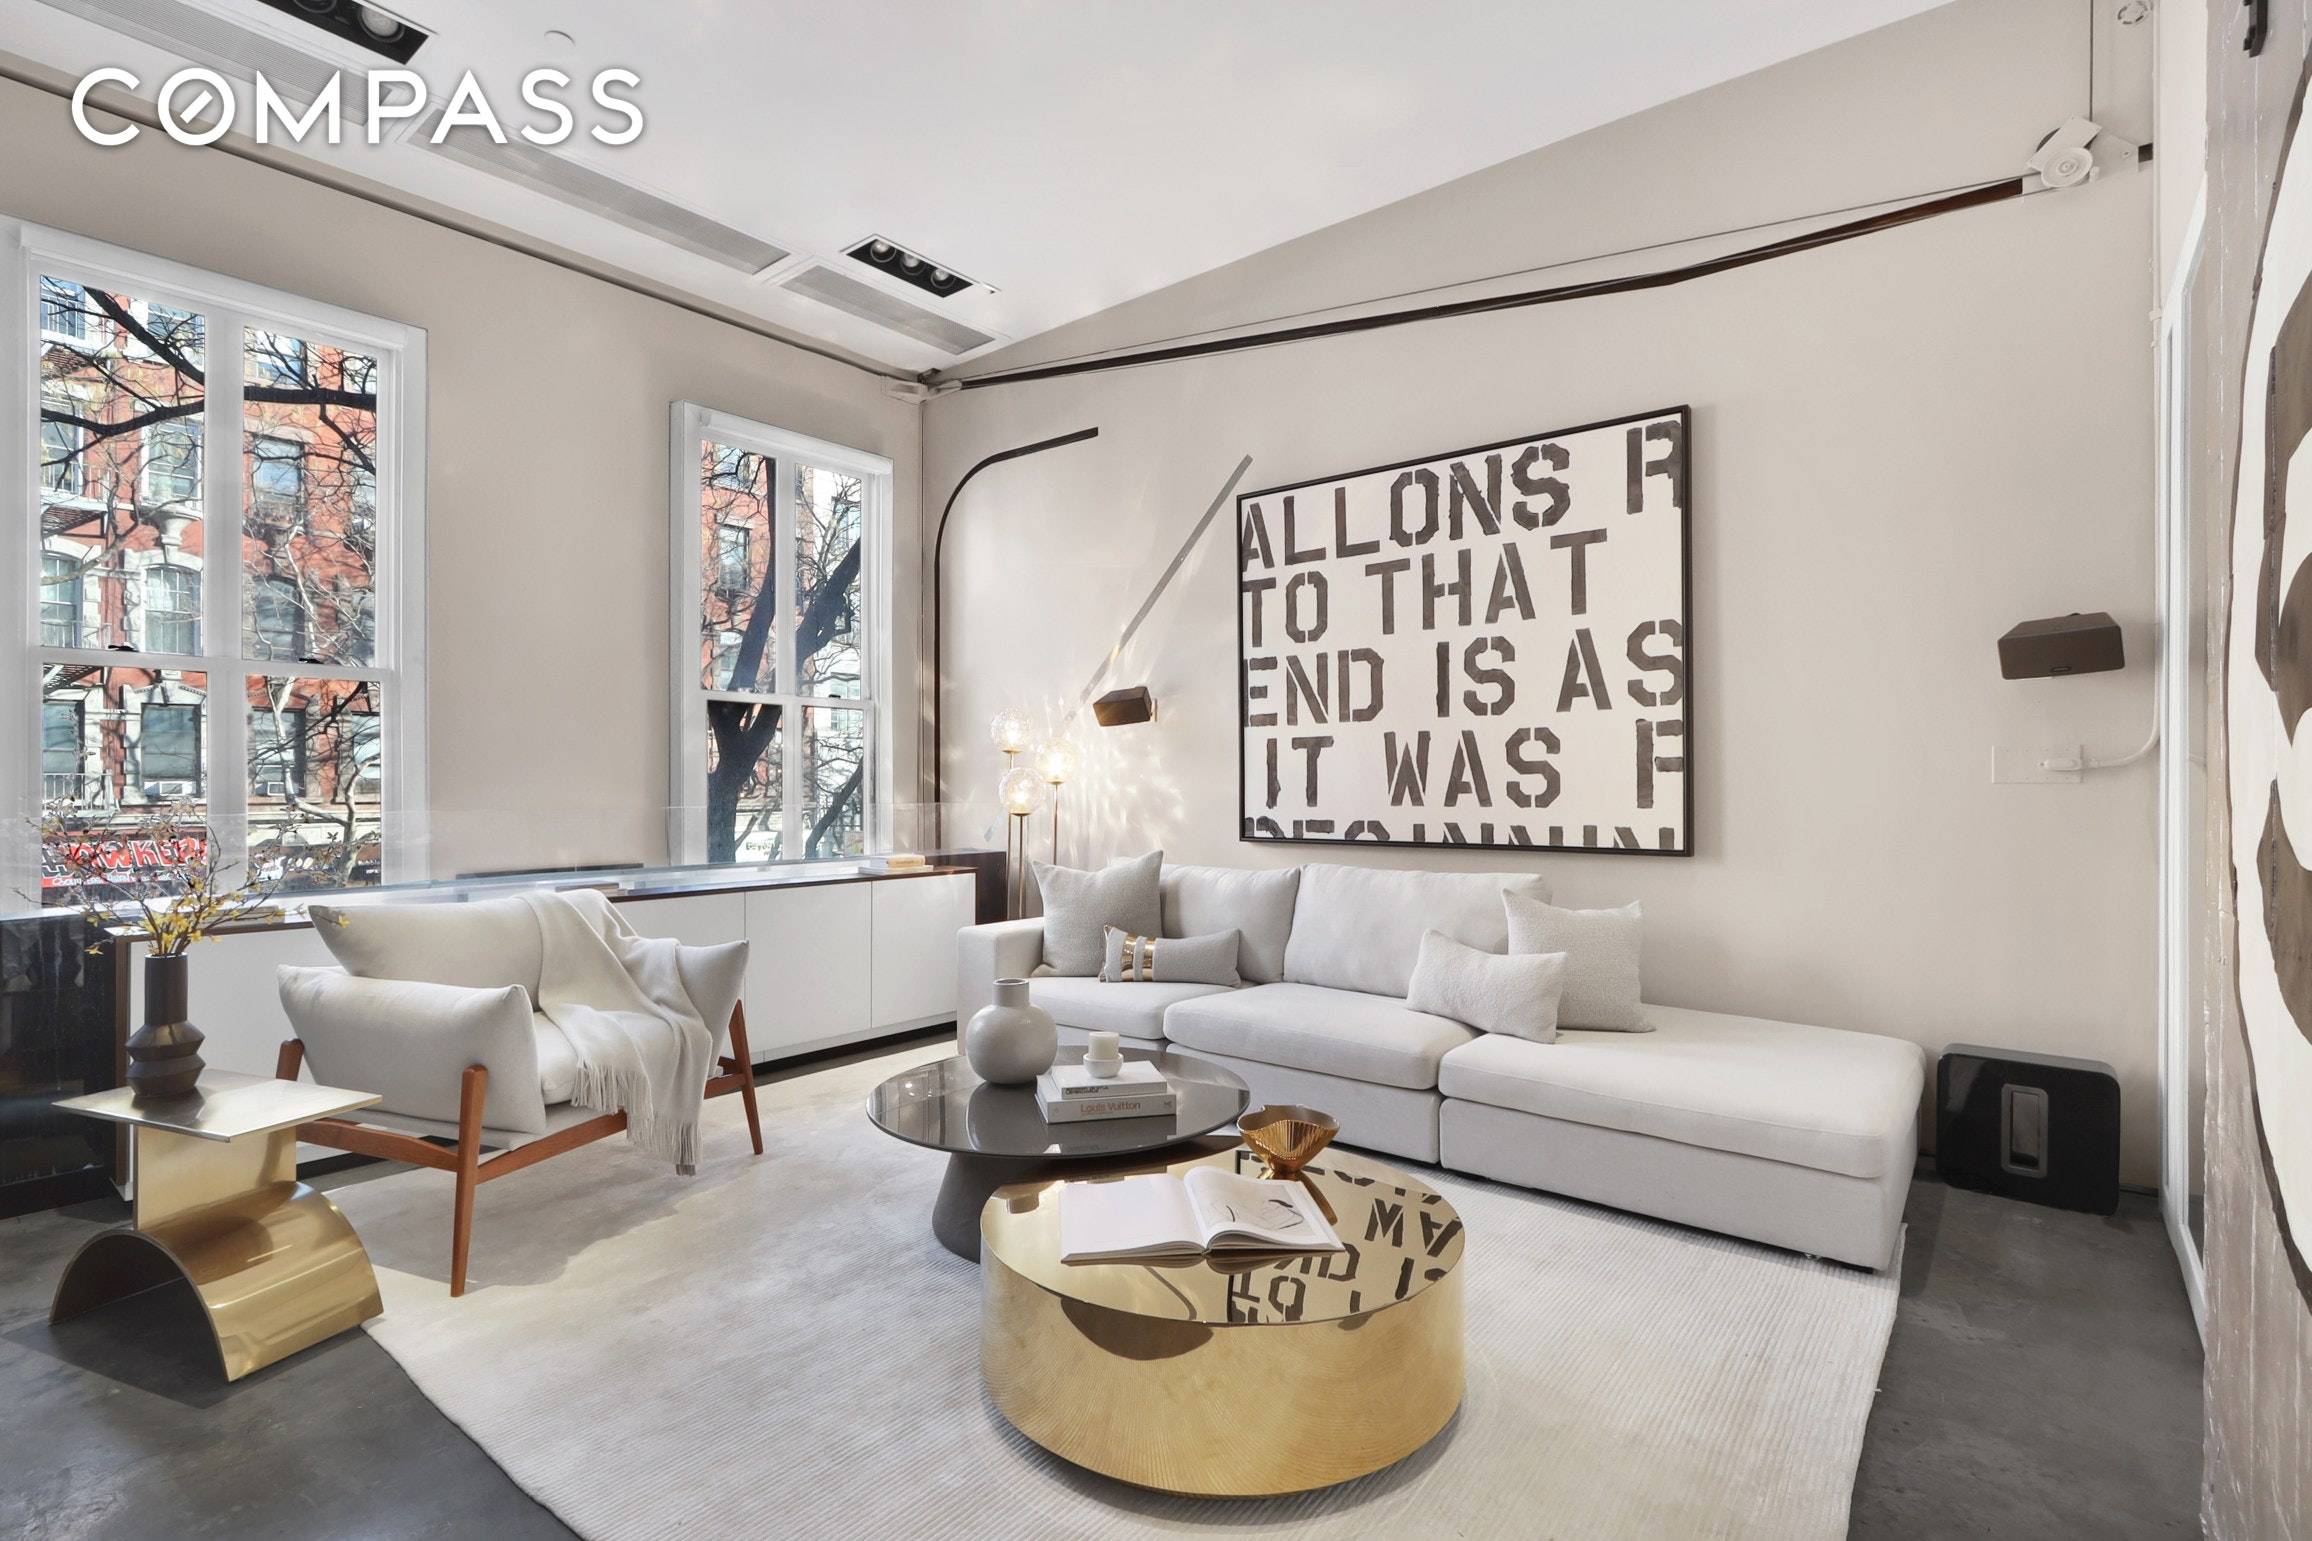 A nationally acclaimed floor through triplex boasting a profusion of custom finishes and an eclectic design palette, this one of a kind 2 bedroom, 2.